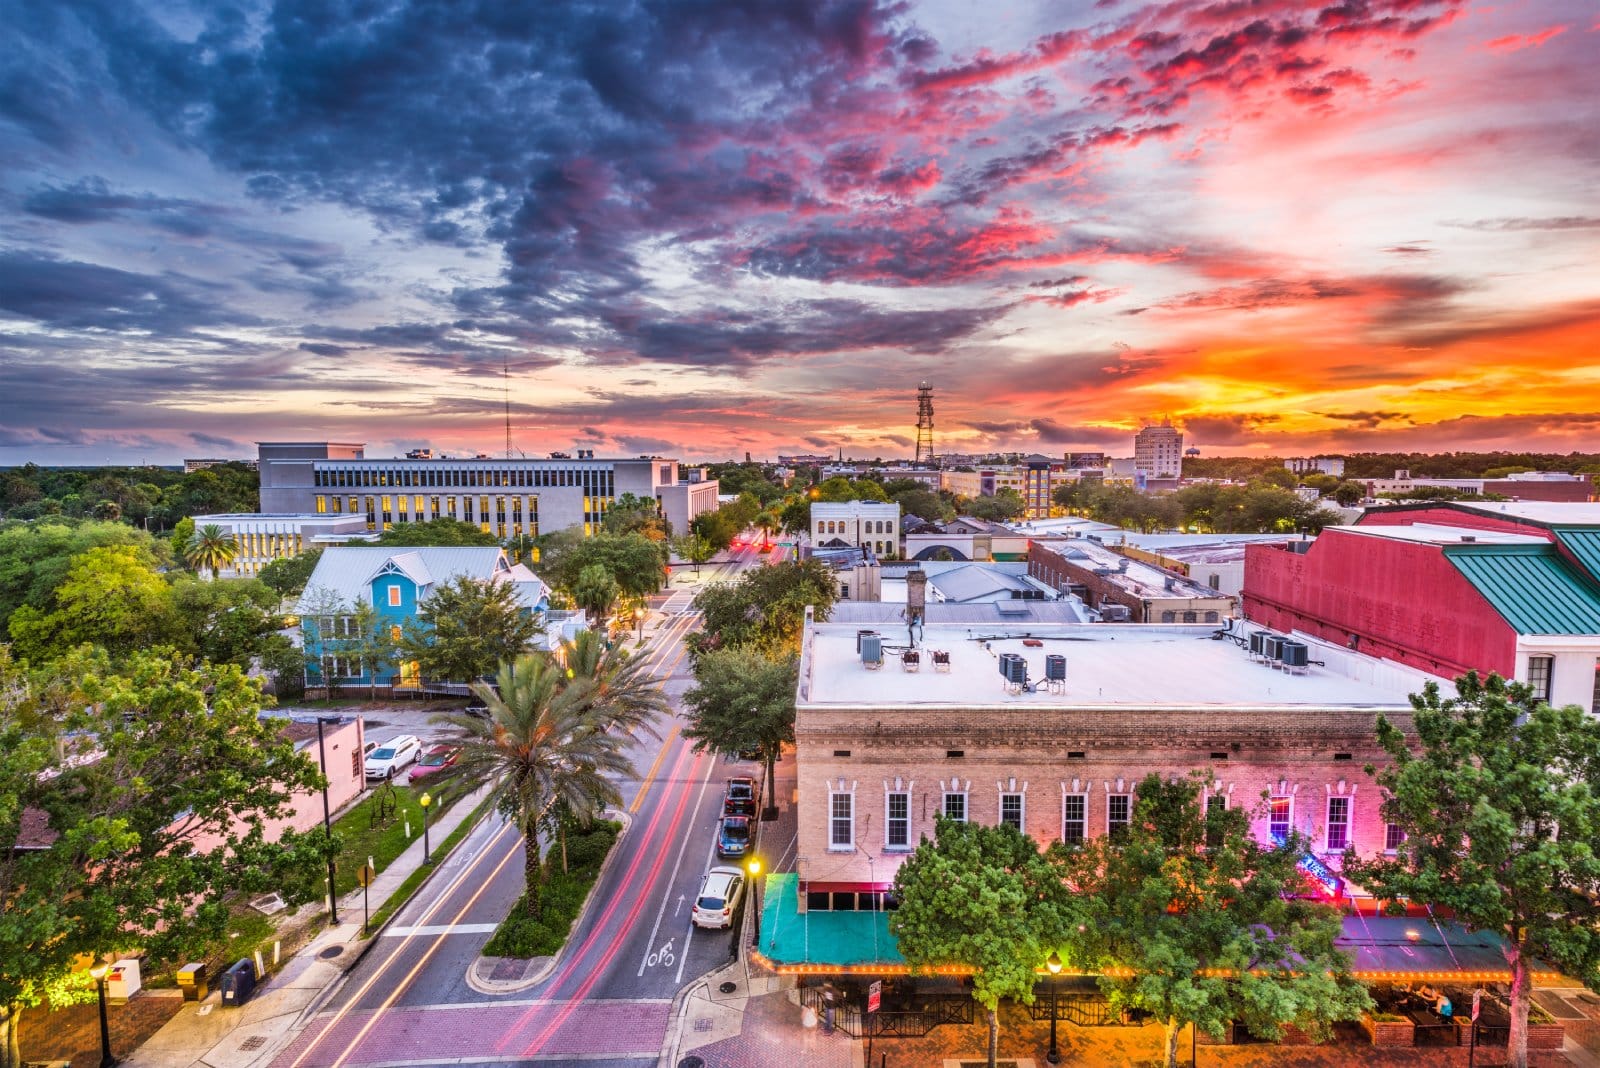 <p class="wp-caption-text">Image Credit: Shutterstock / Sean Pavone</p>  <p><span>Gainesville offers a unique slice of Florida, far from the crowded beaches. Explore the natural springs, enjoy the lively downtown, and immerse yourself in the local art and music scenes.</span></p>